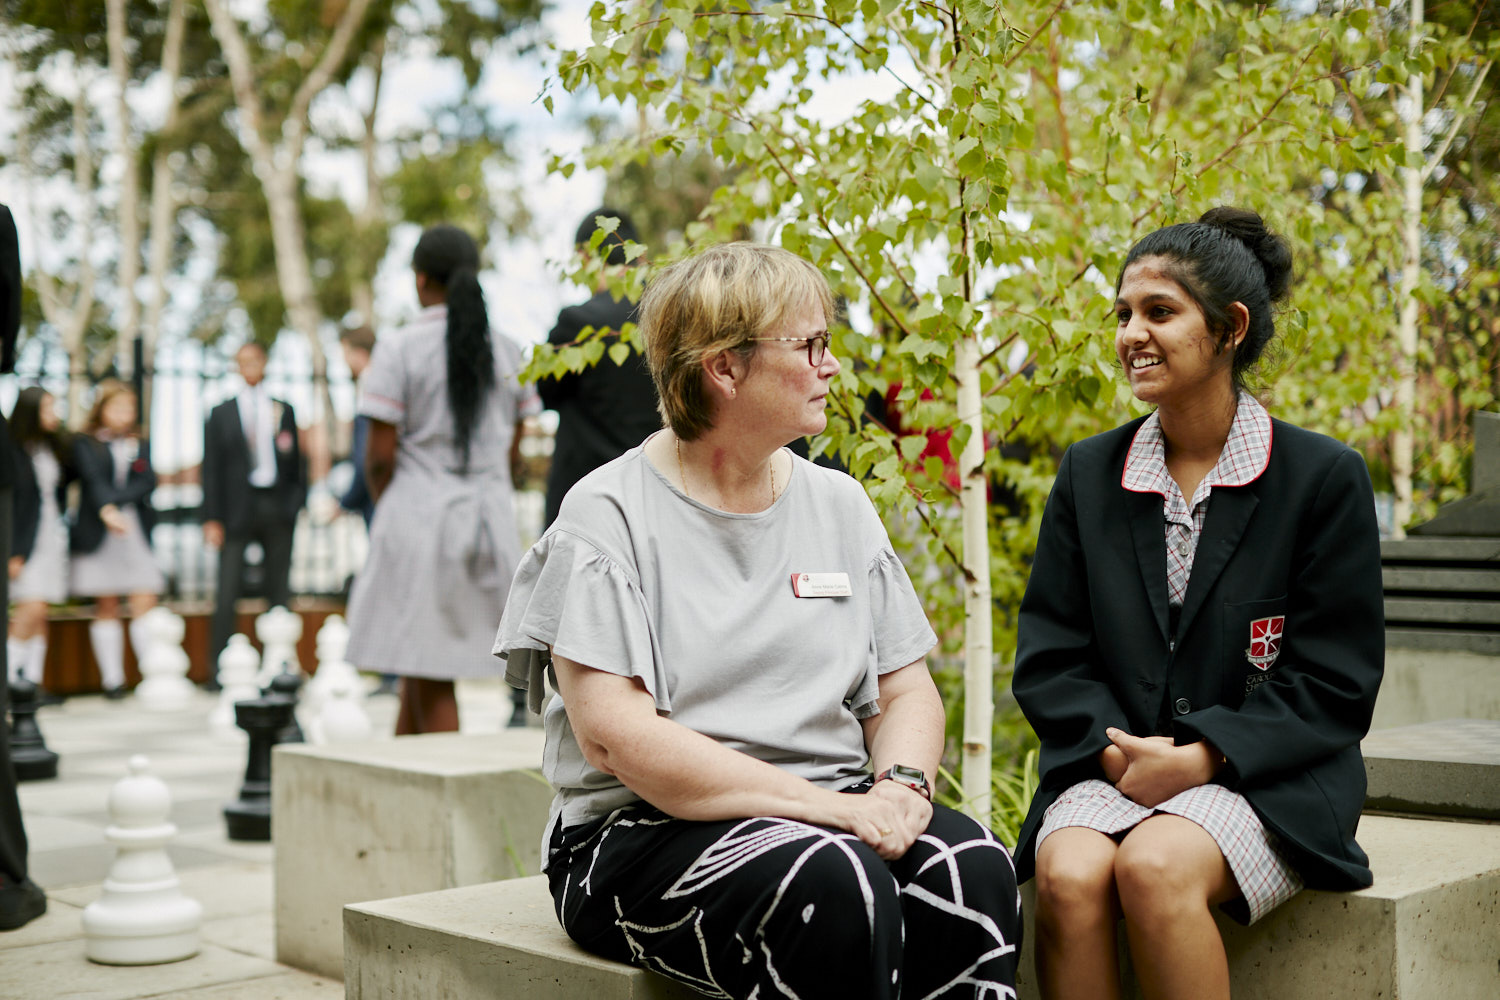 An educator sitting with an adolescent, engaged in conversation